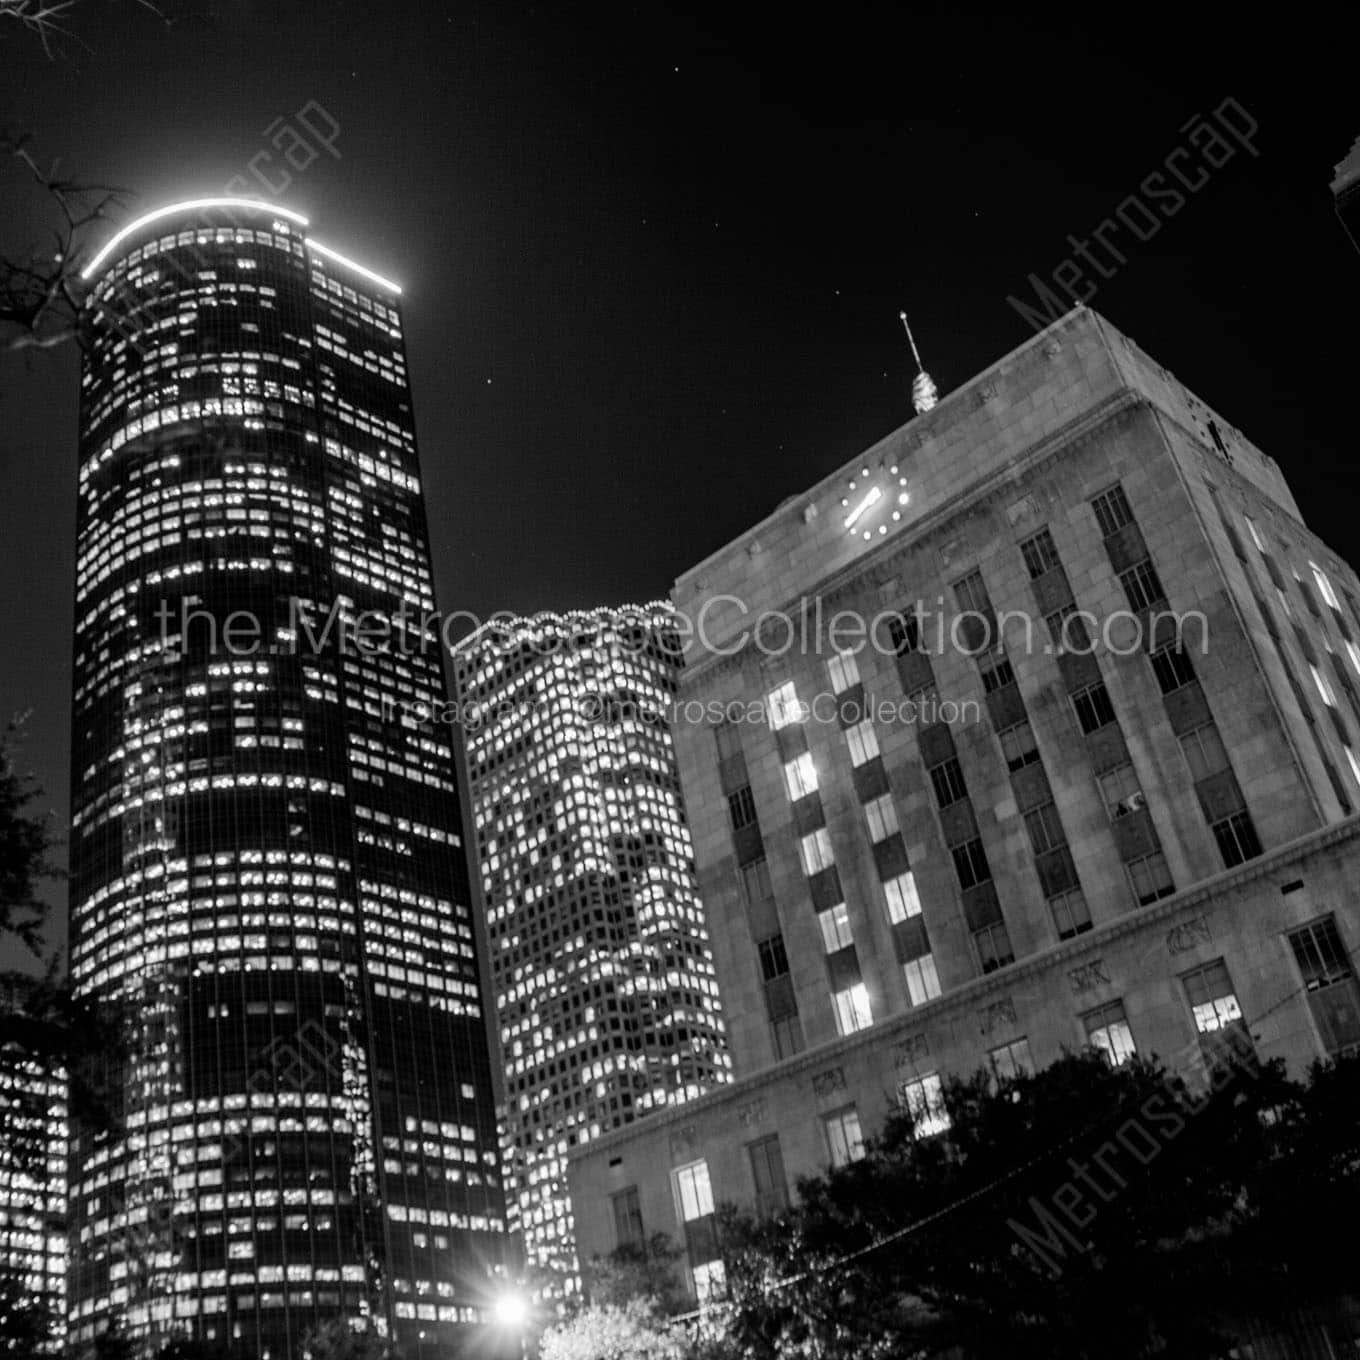 shell building and houston city hall at night Black & White Wall Art